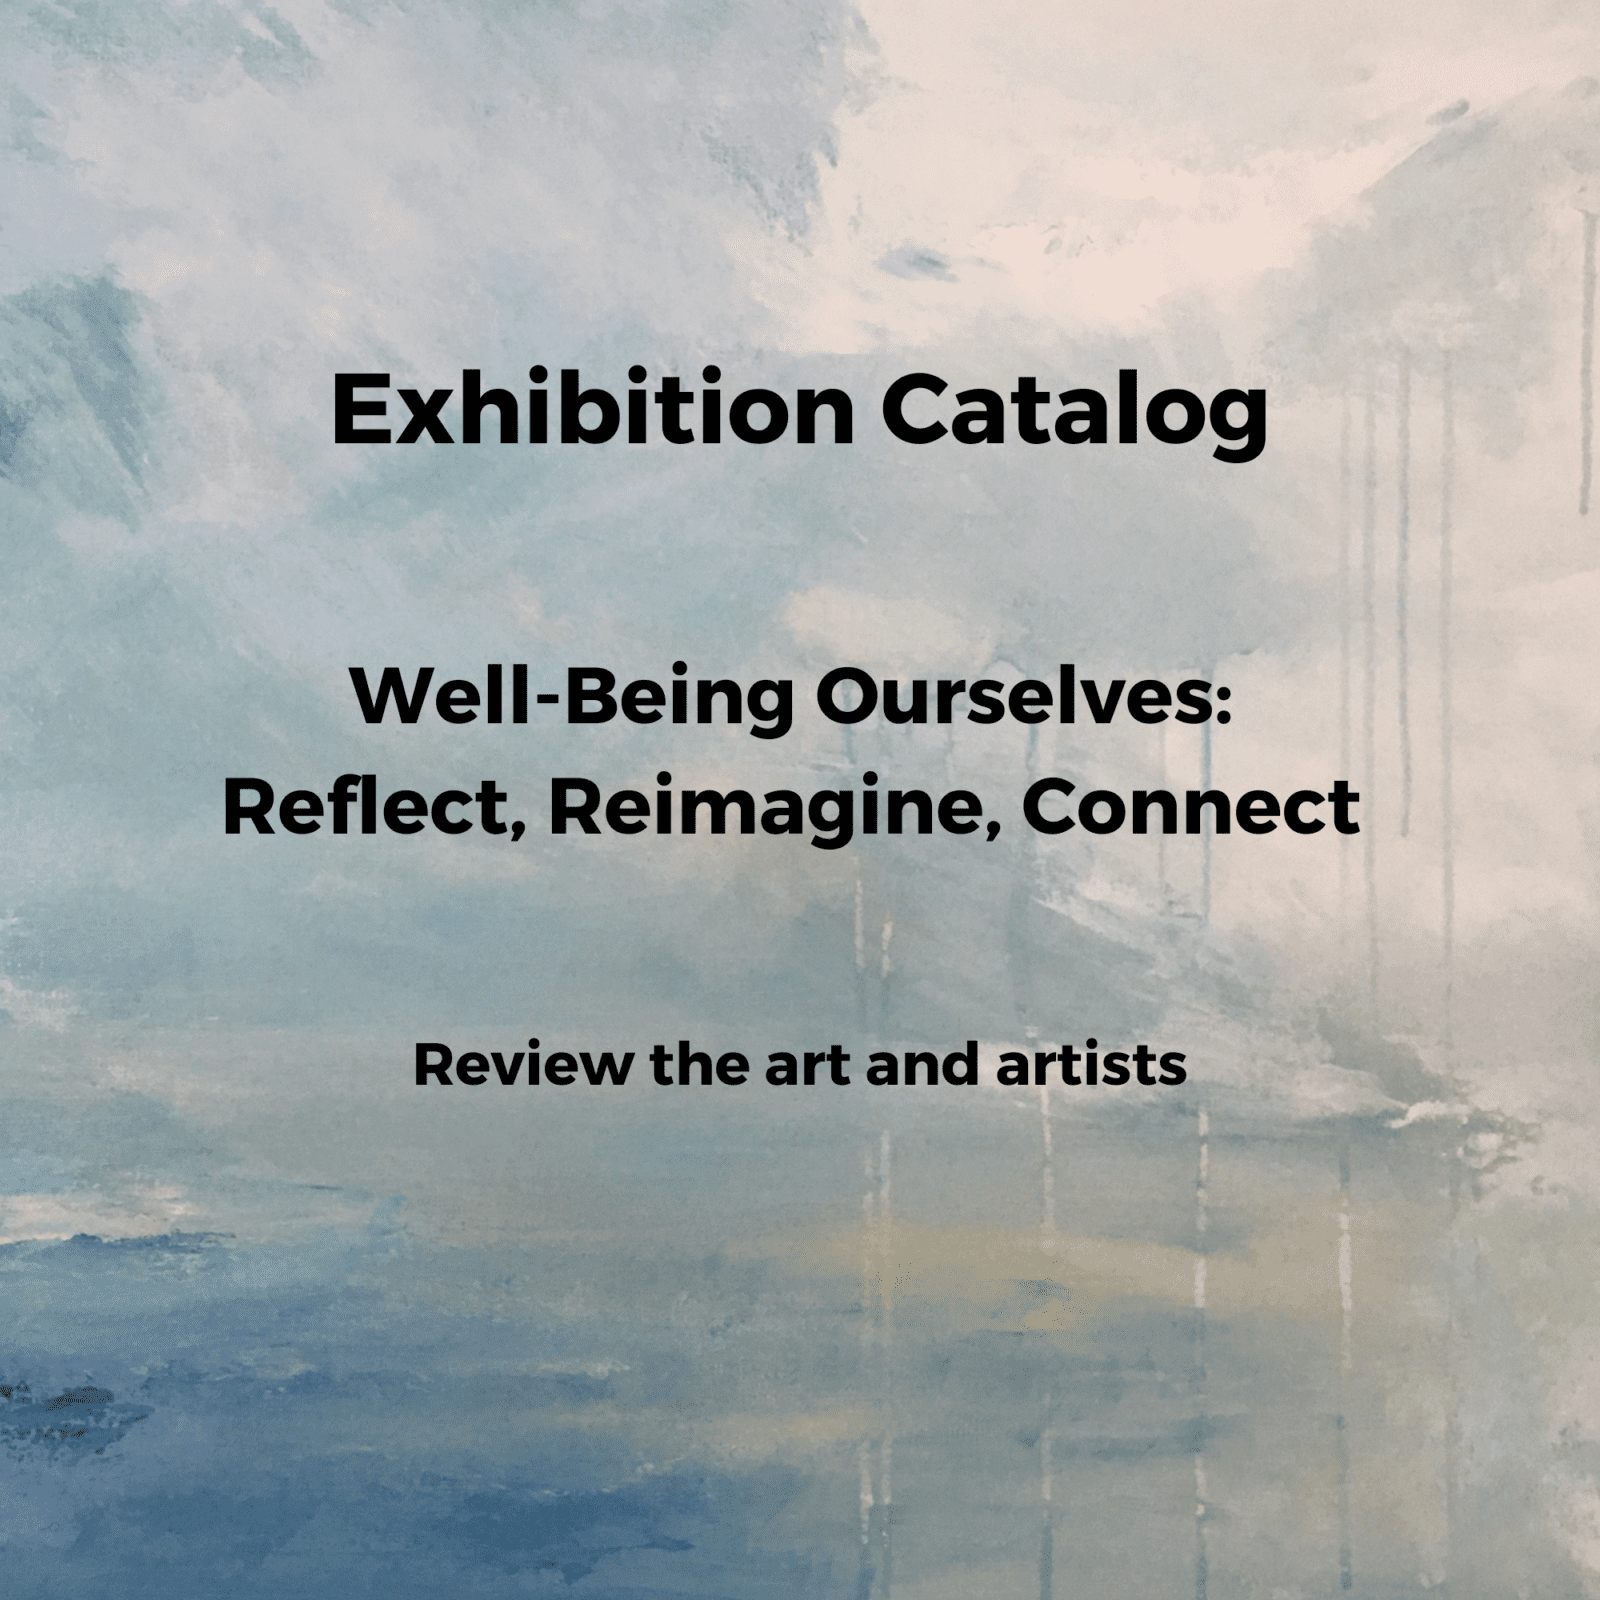 Well-Being Ourselves: Reflect, Reimagine, Connect